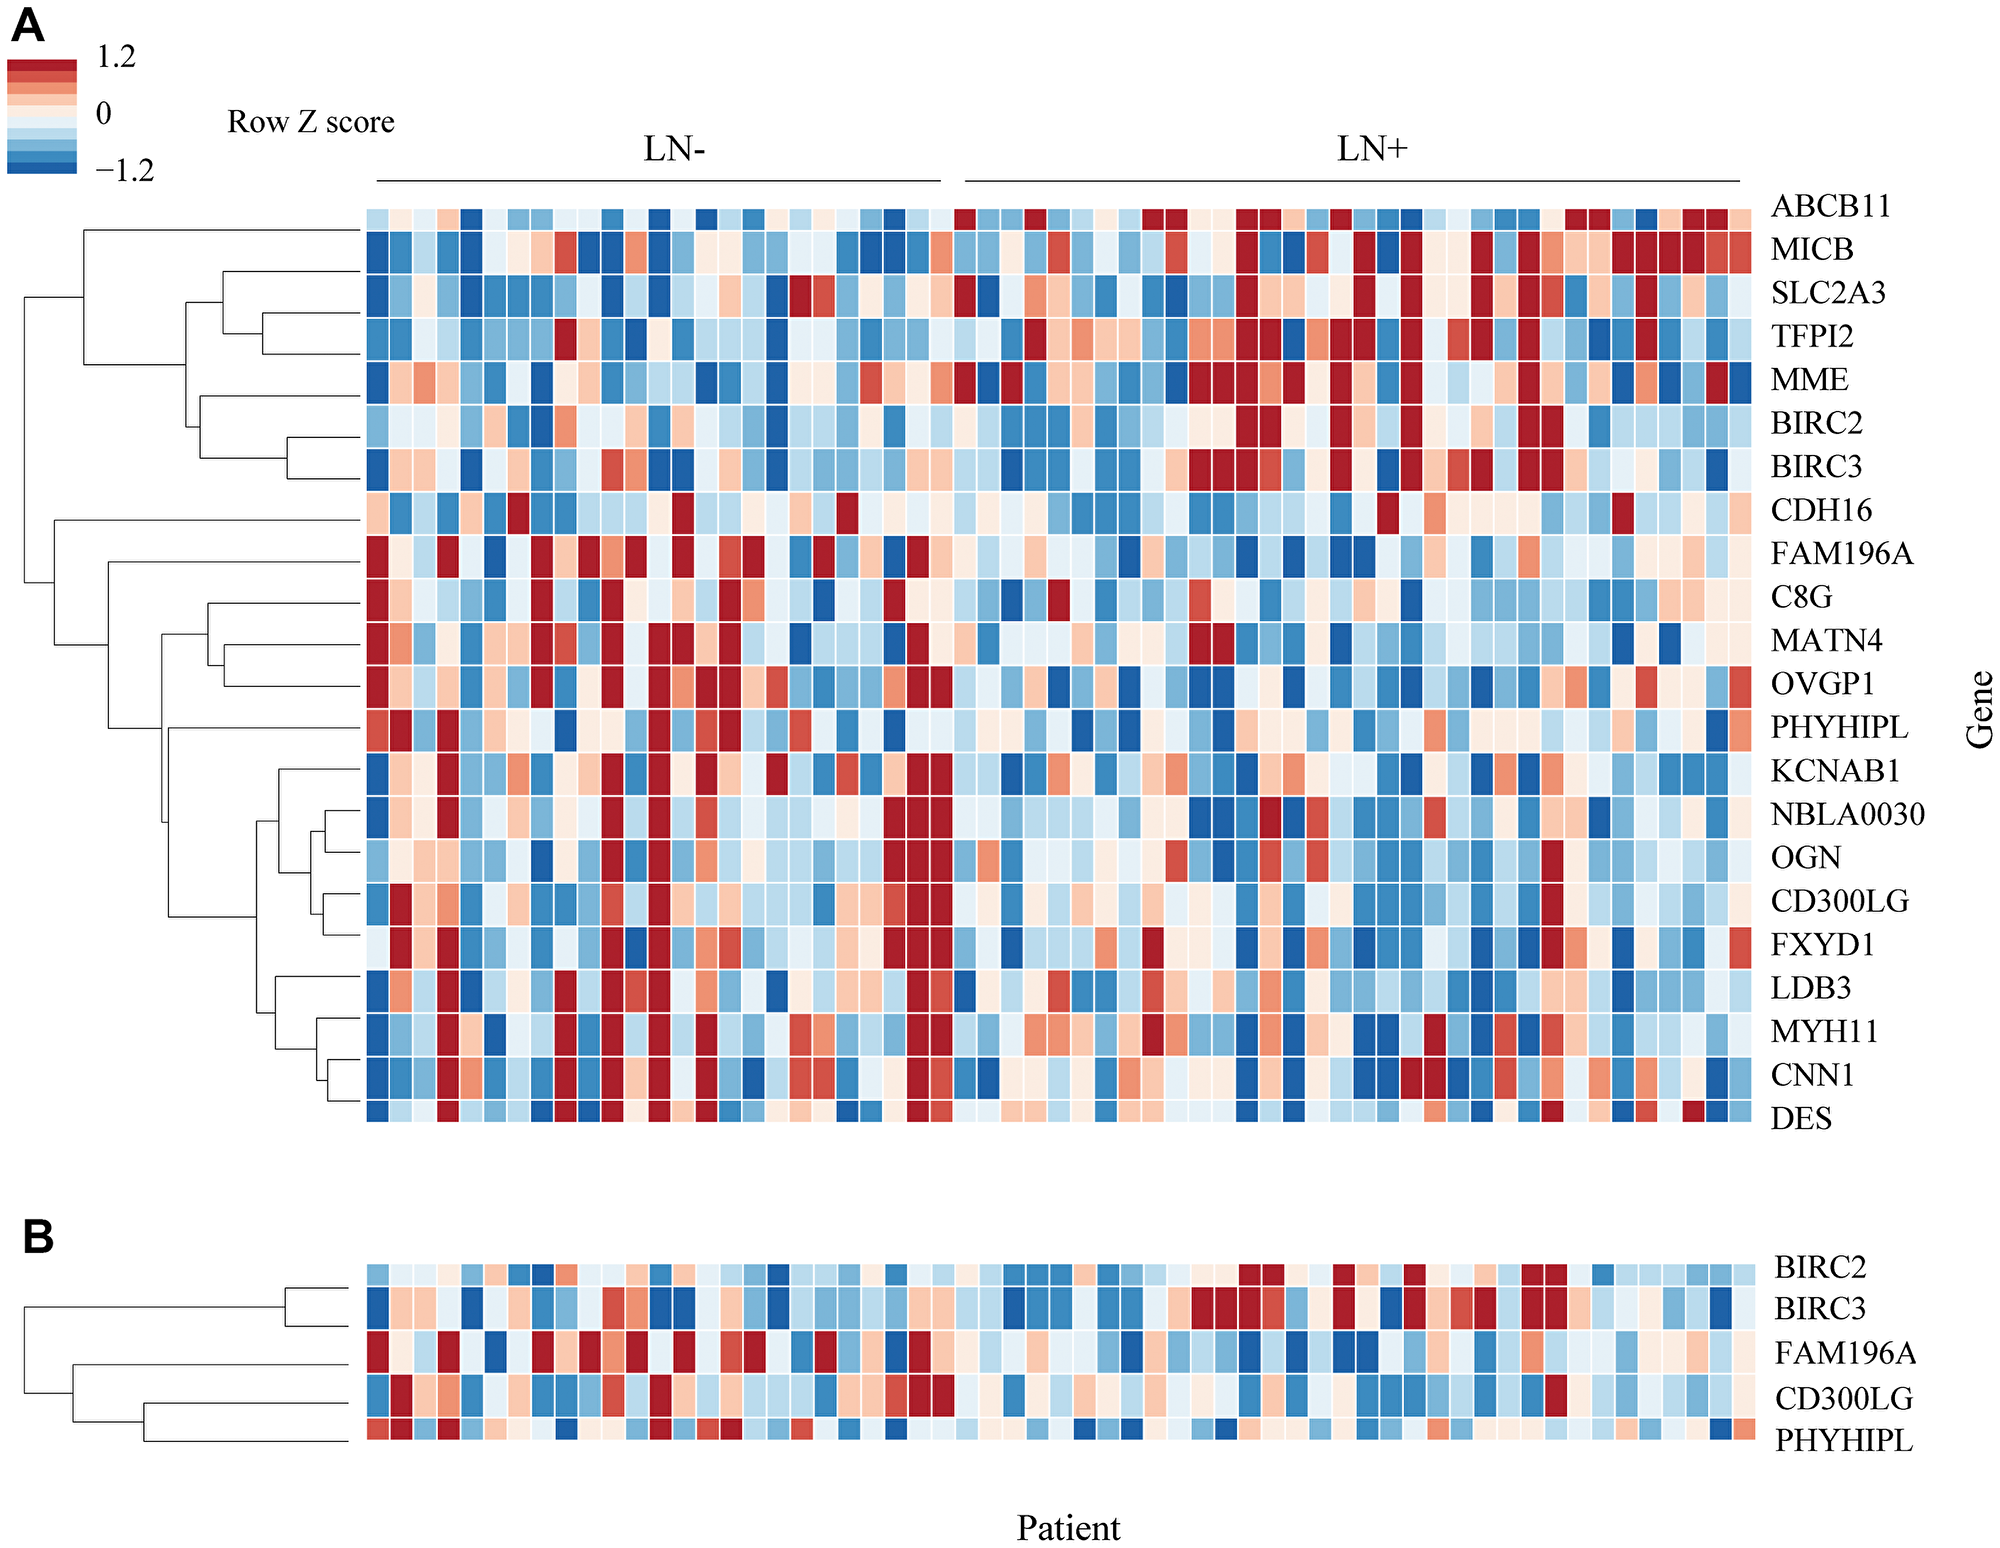 Heatmap of differentially expressed genes.